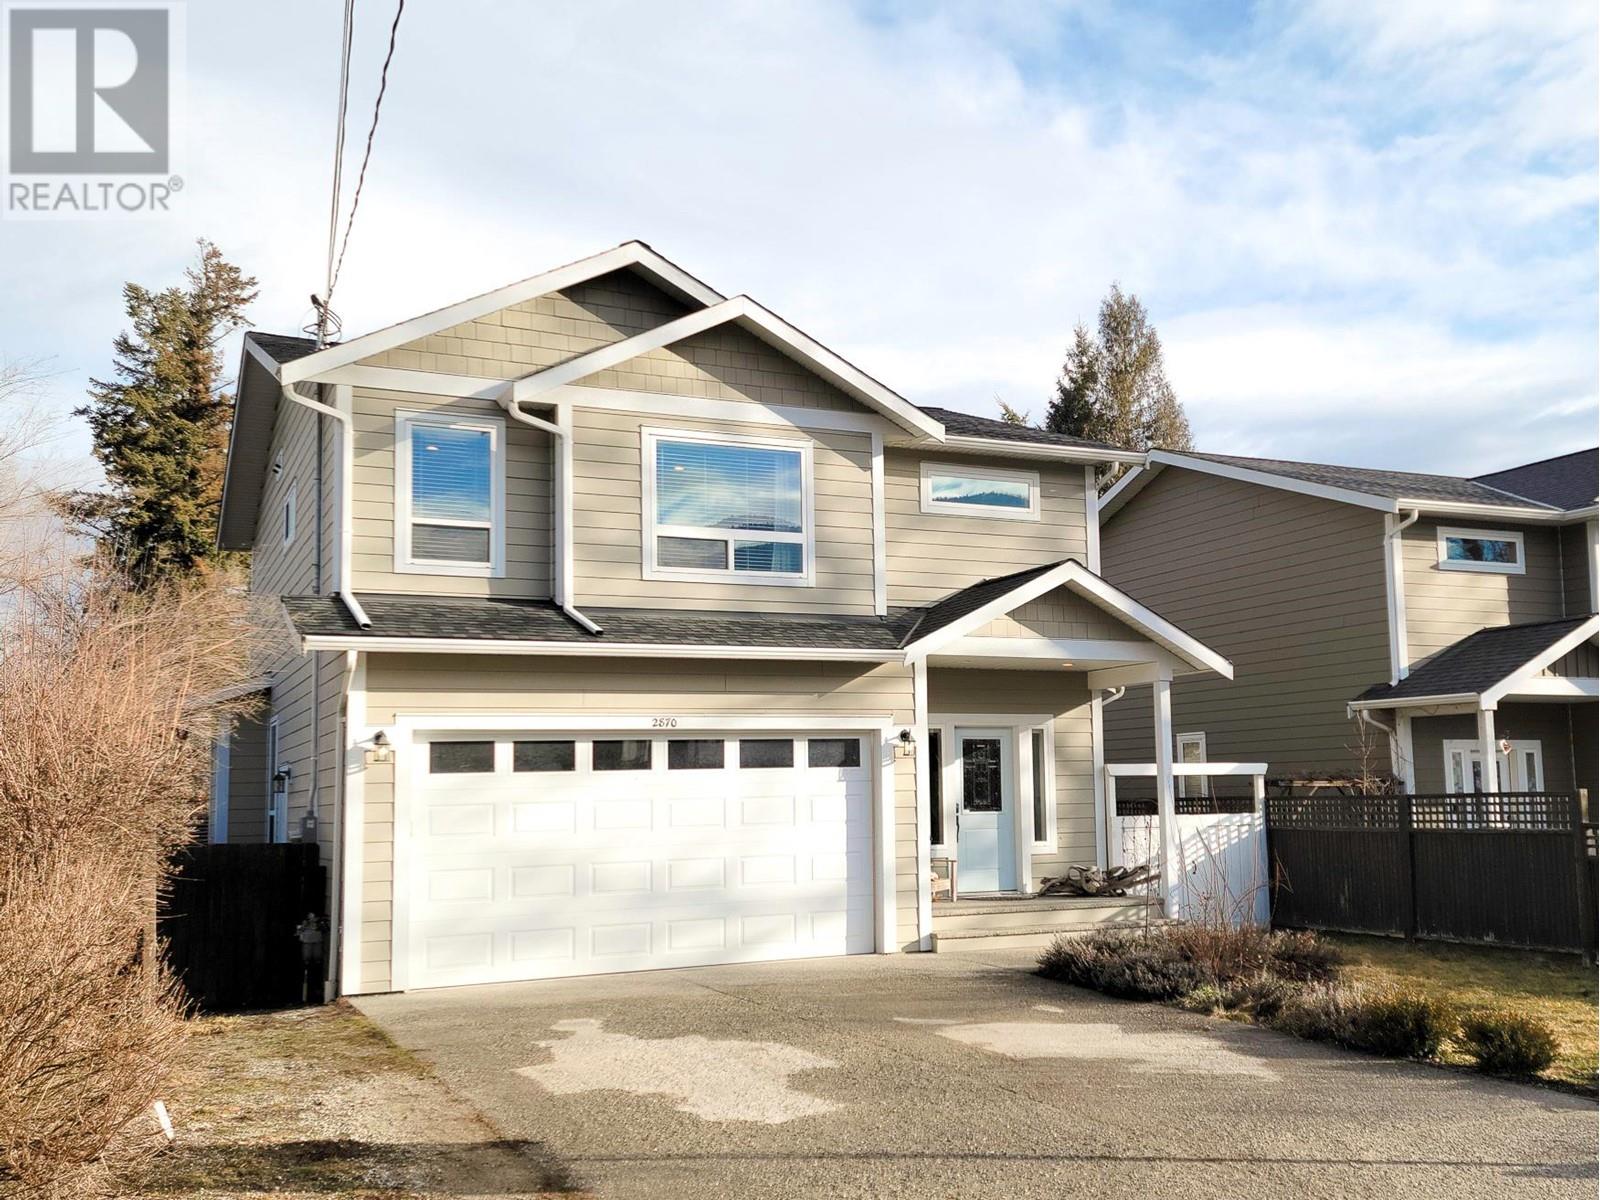 2870 Burns Avenue located in Armstrong, British Columbia